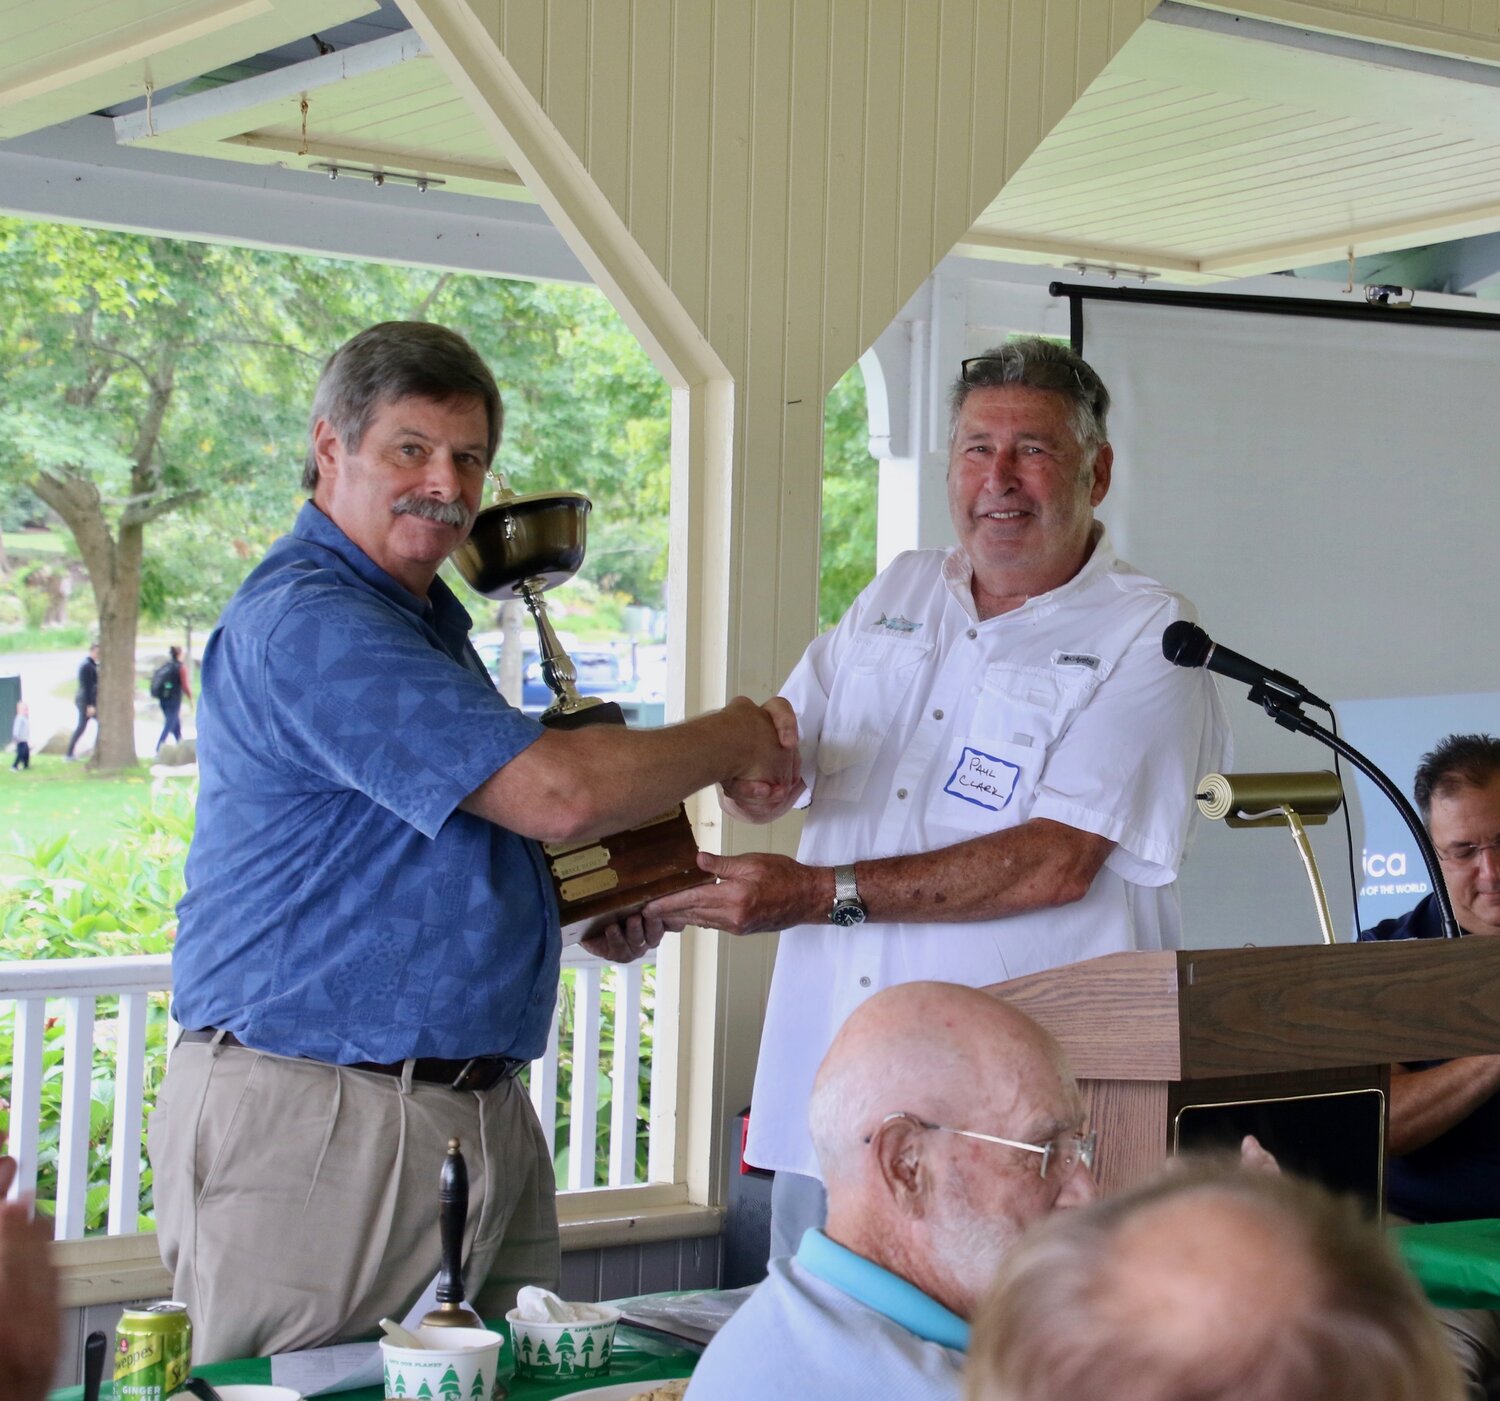 Cricket Assistant Editor Paul Clark, presenting Mike Chapman with the Elder Brethren Slade Eaton Award, the ceremonial cup for community service.